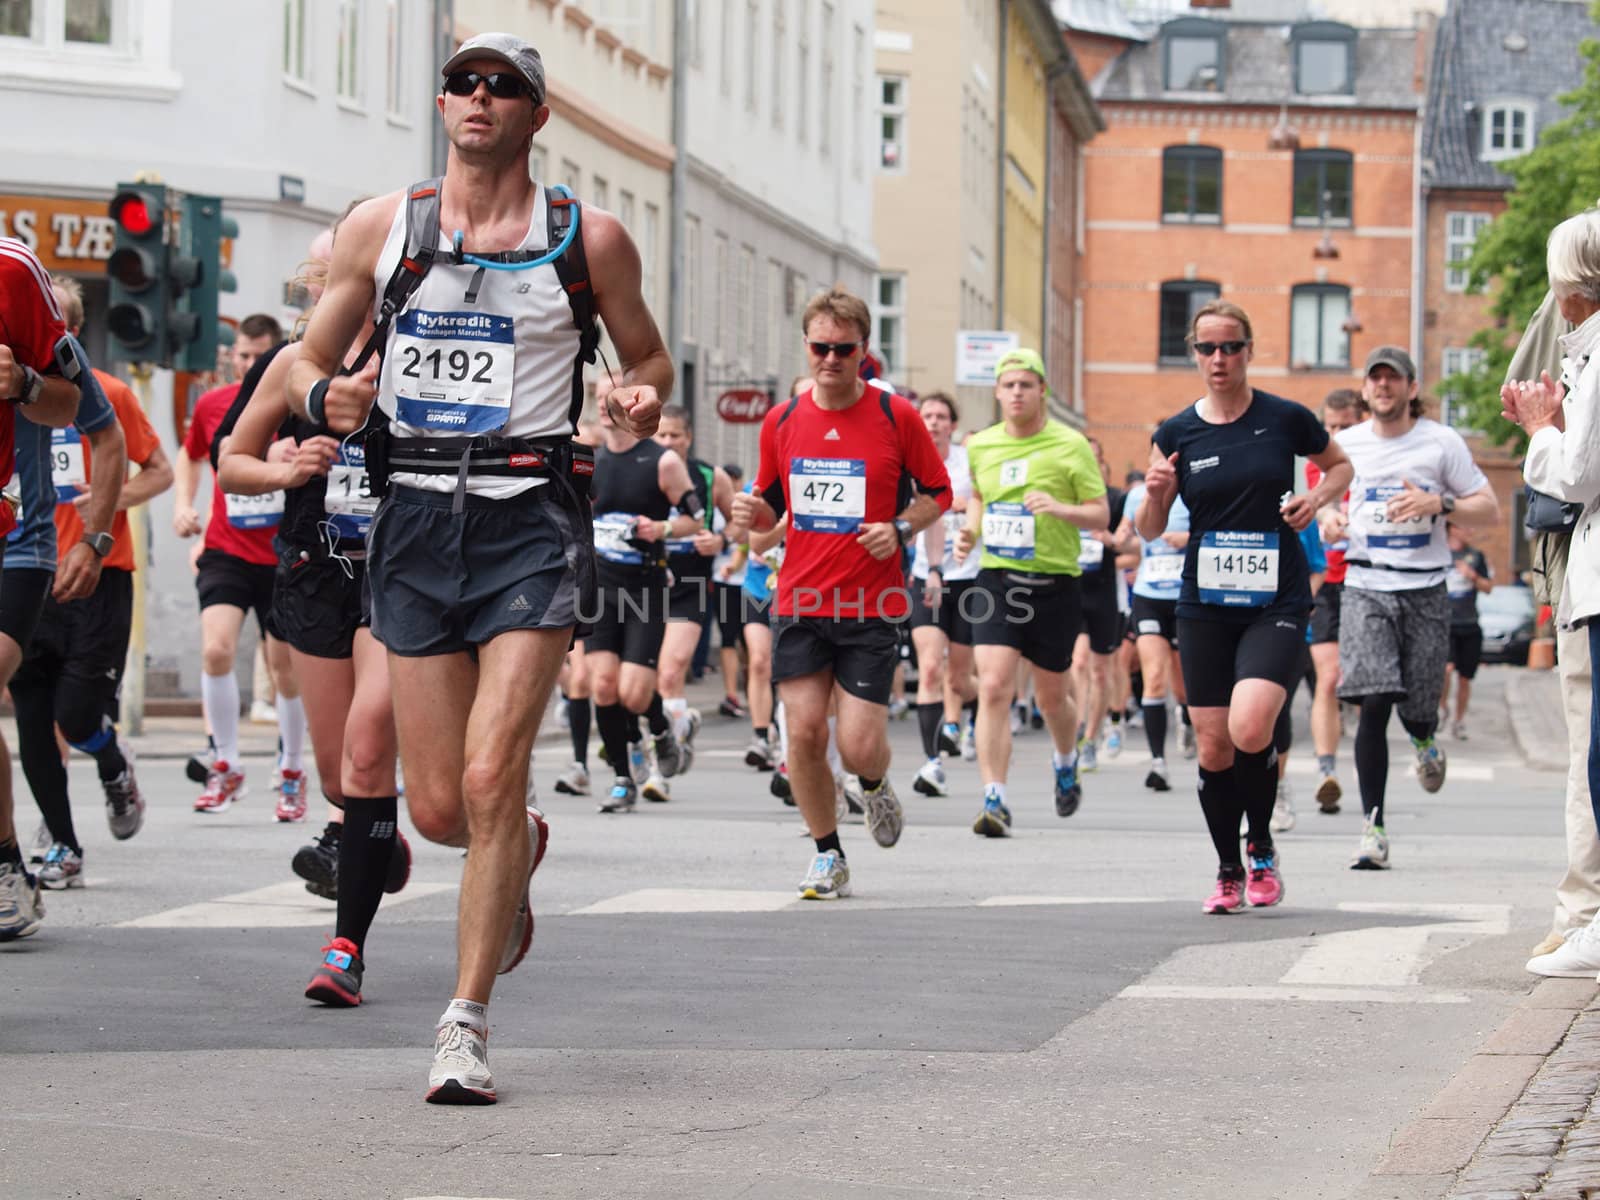 COPENHAGEN - MAY 21: More than 12,000 runners from 40 countries participate in the yearly Copenhagen Marathon. It covers a 42- kilometre route mostly within the city centre in Copenhagen, Denmark.